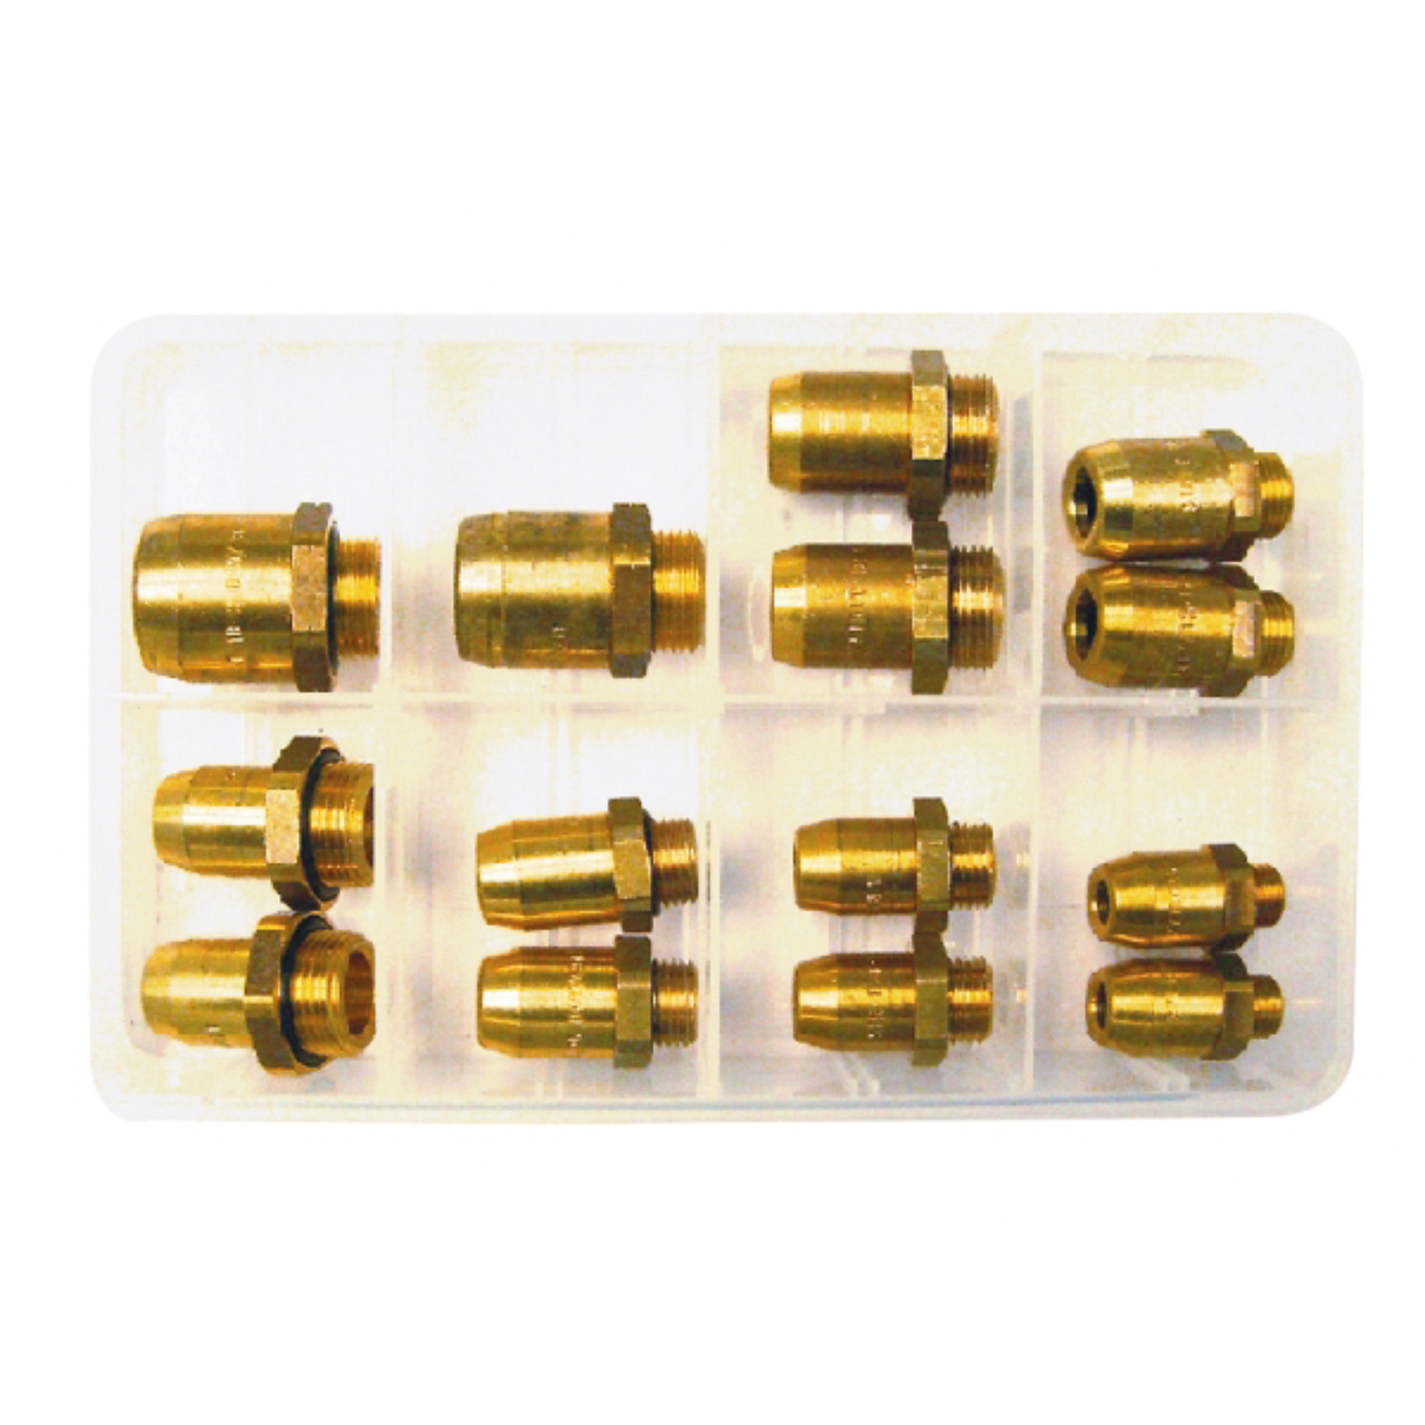 Assorted Male Stud Couplings 14 Piece Mix Box